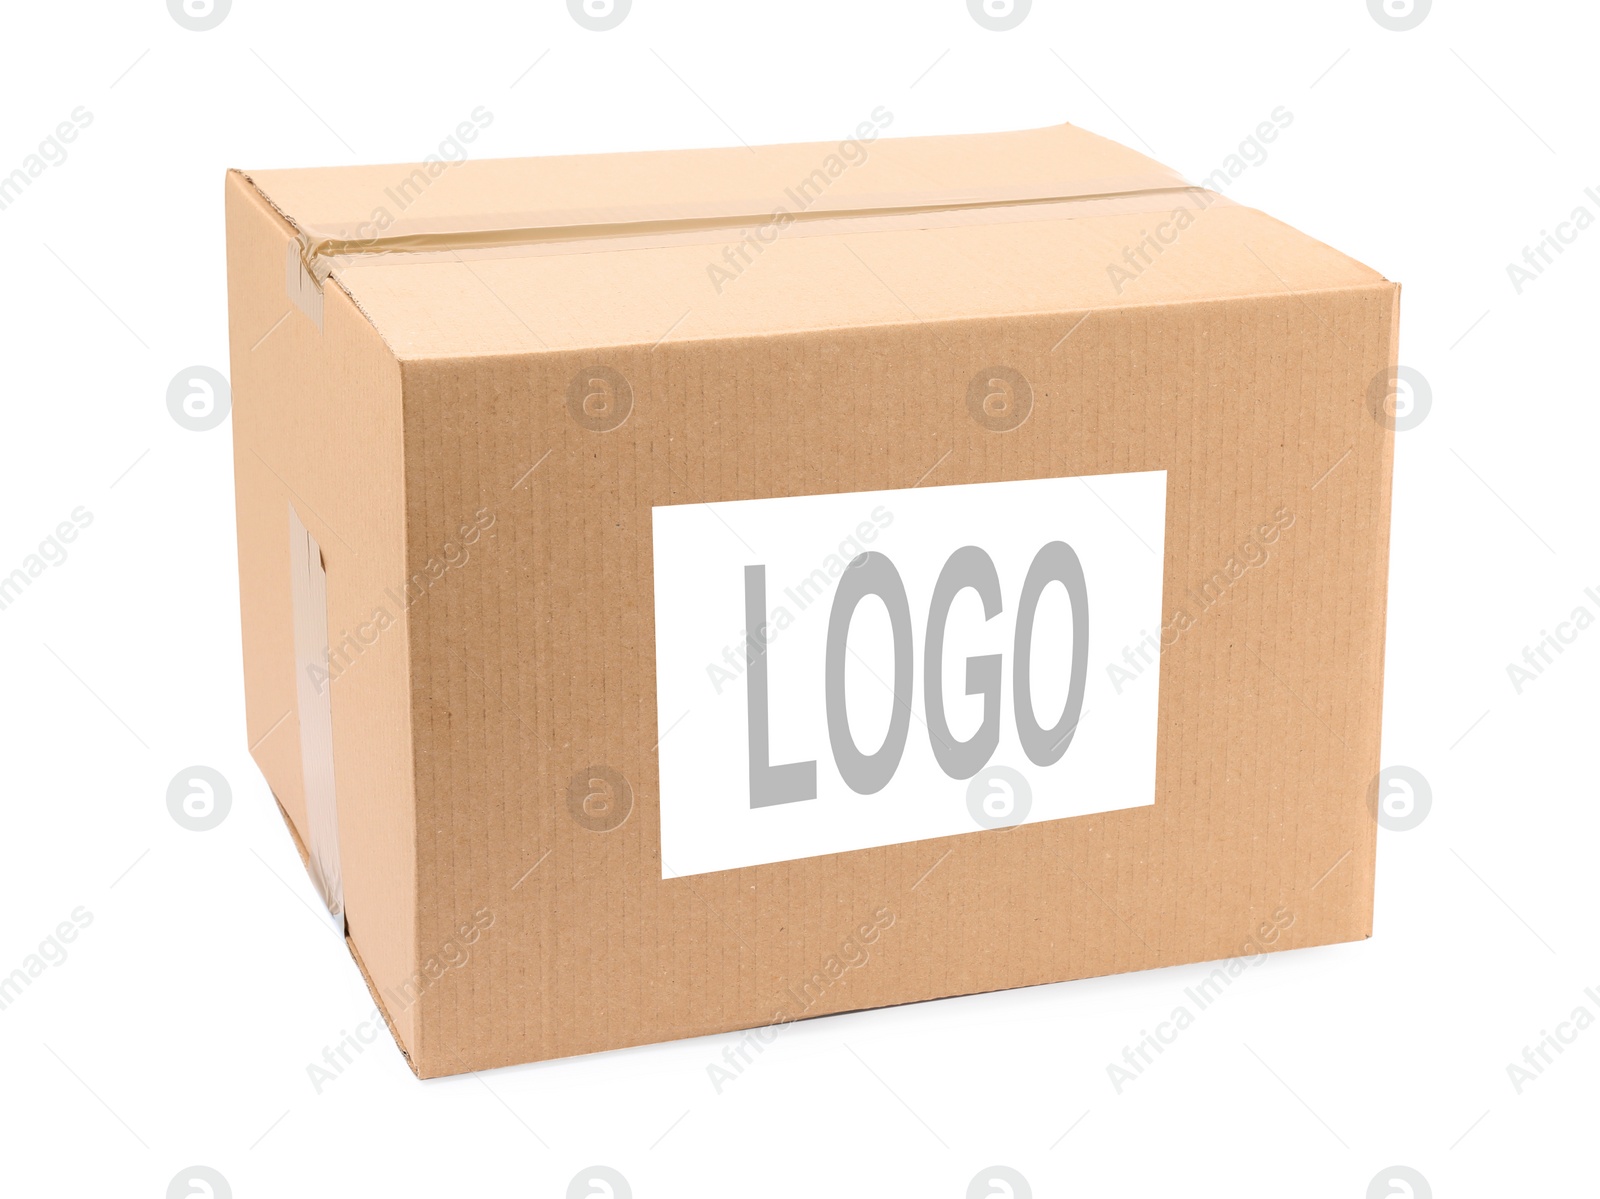 Image of Closed cardboard box with logo on white background